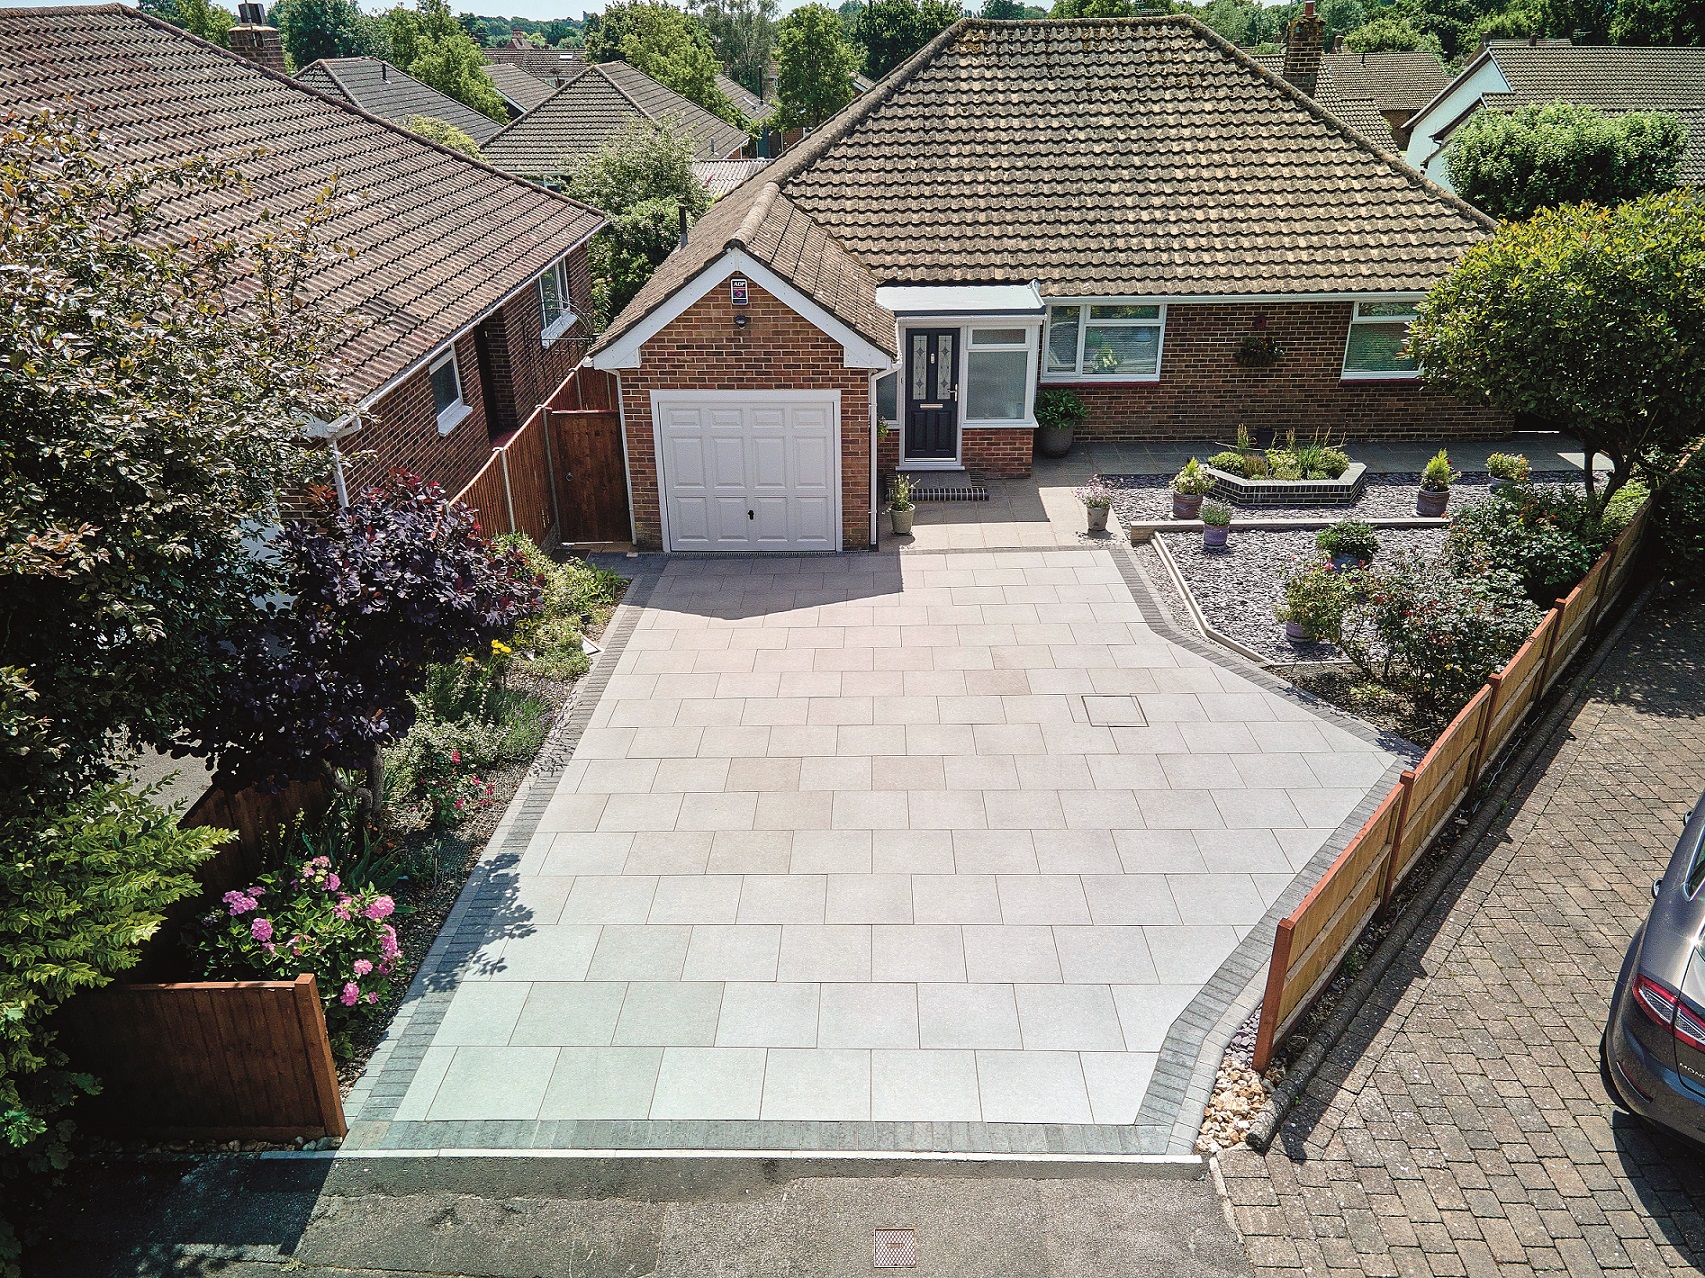 GeoCeramica Bluestone Gris Claro, Omega Charcoal and Drivestyle Kerb Charcoal